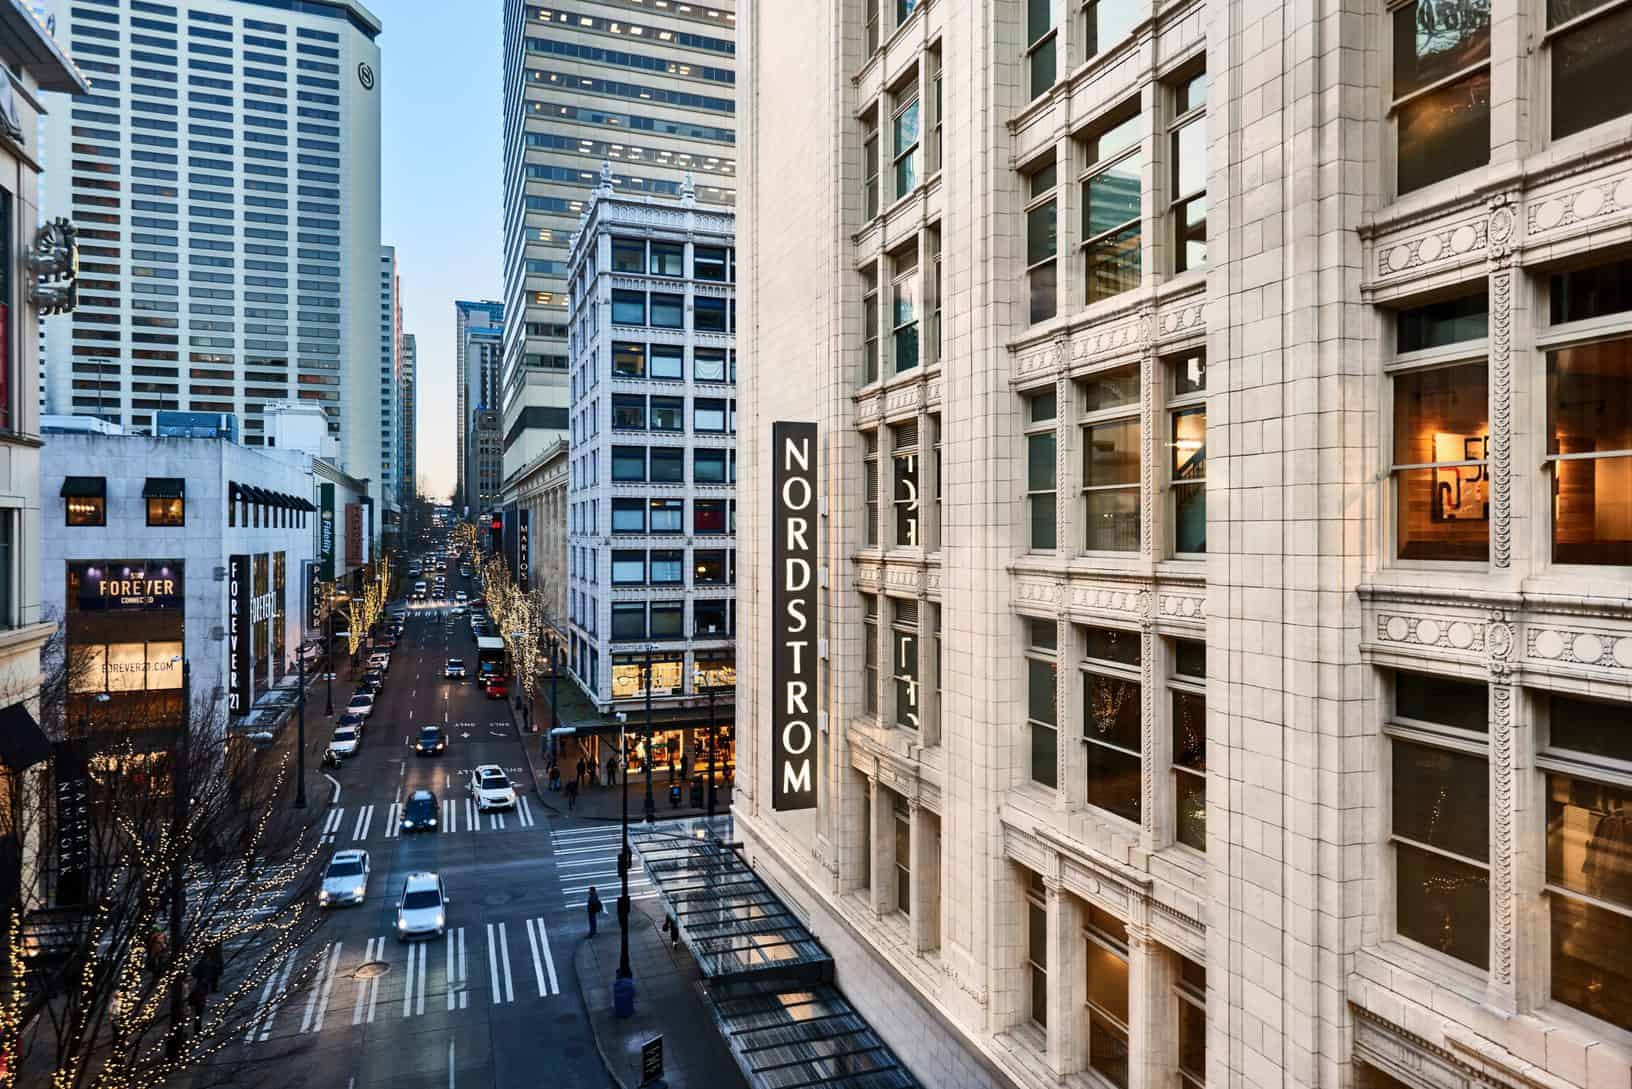 Louis Vuitton boutique to open at downtown Seattle Nordstrom